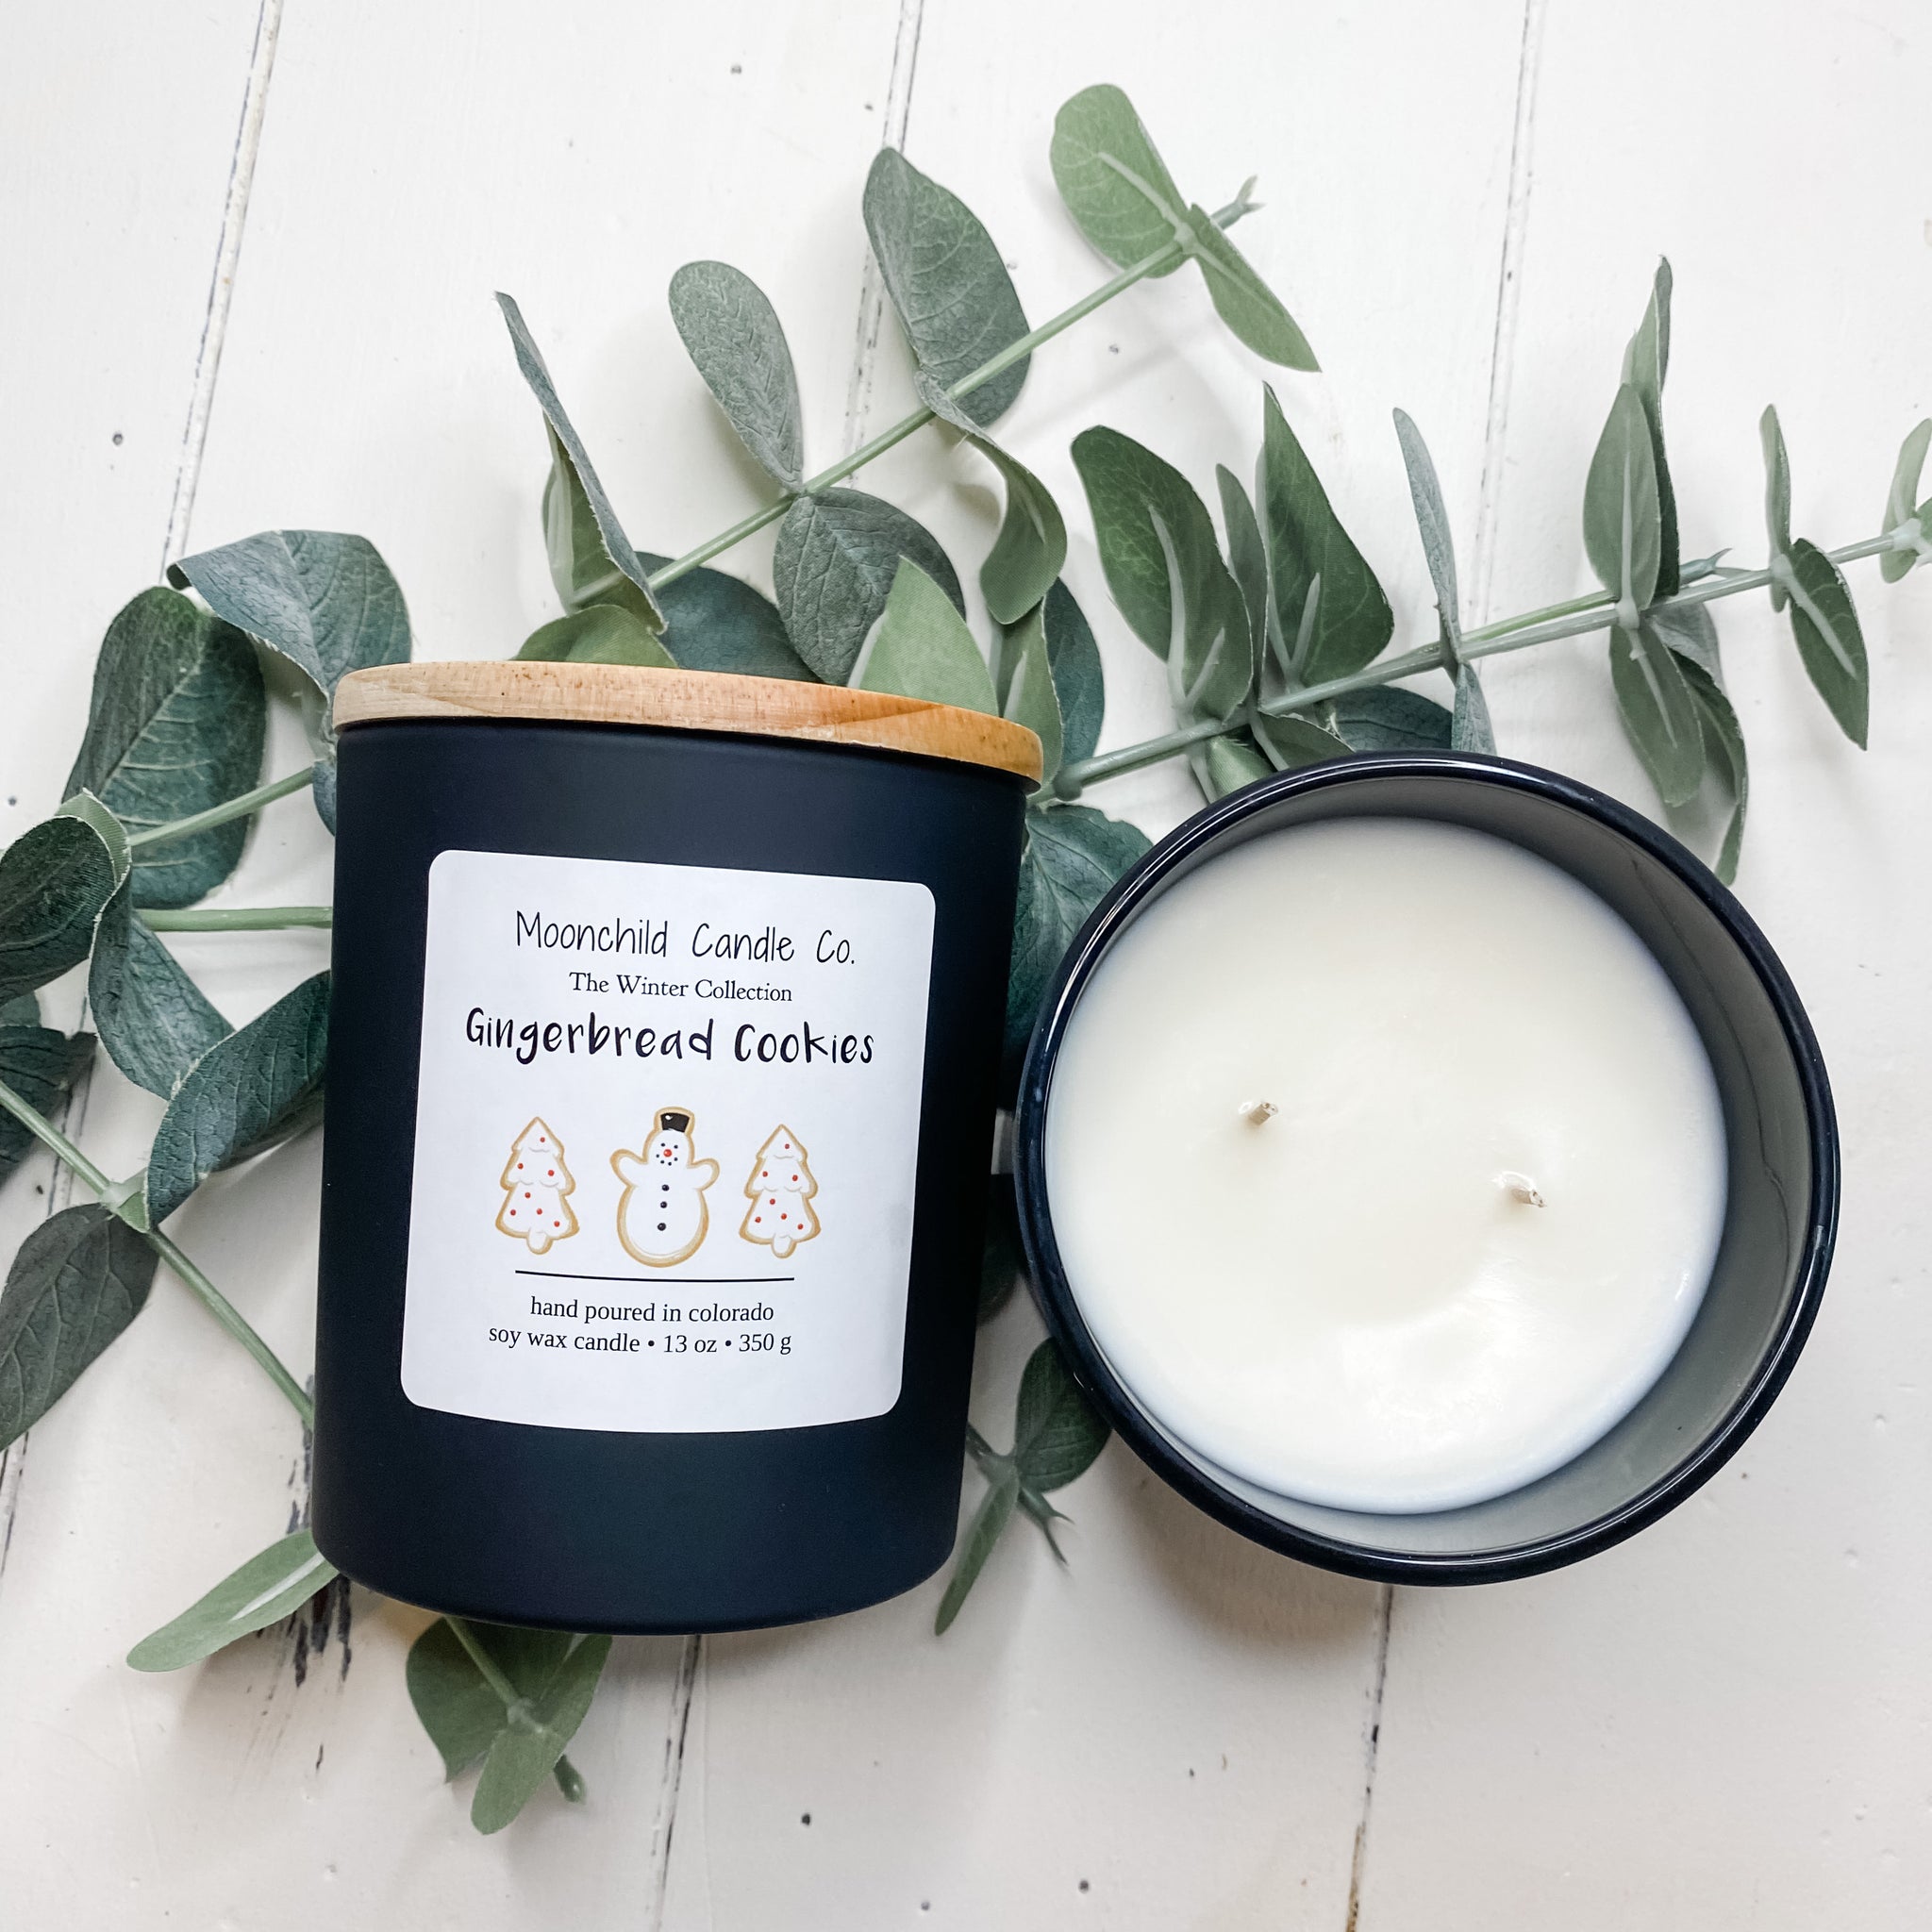 Gingerbread Cookies - Moonchild Candle Co.